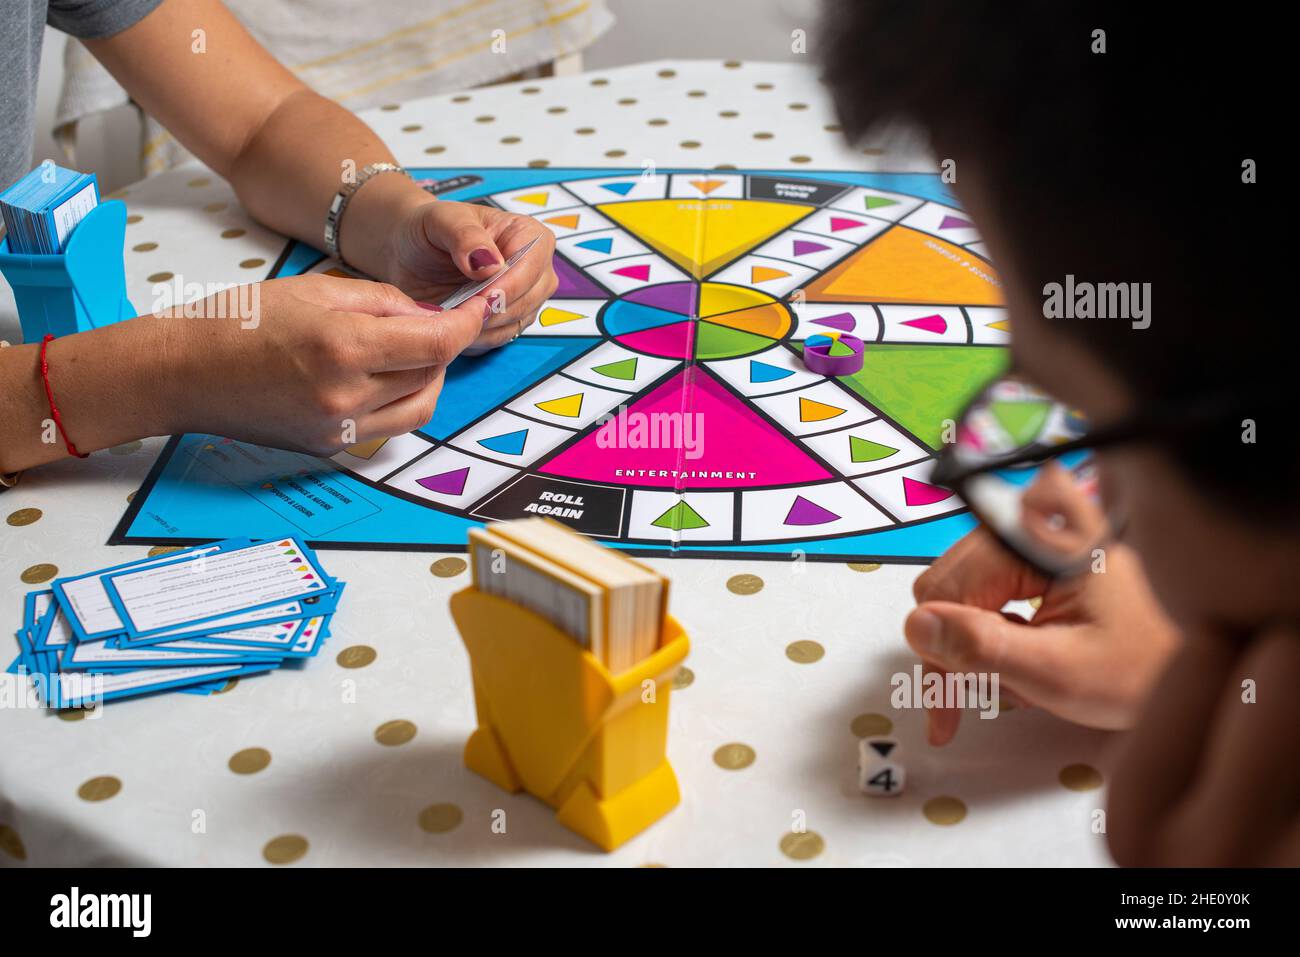 Playing Trivial  pursuit board game at home during Covid-19 lockdown, London,UK Stock Photo